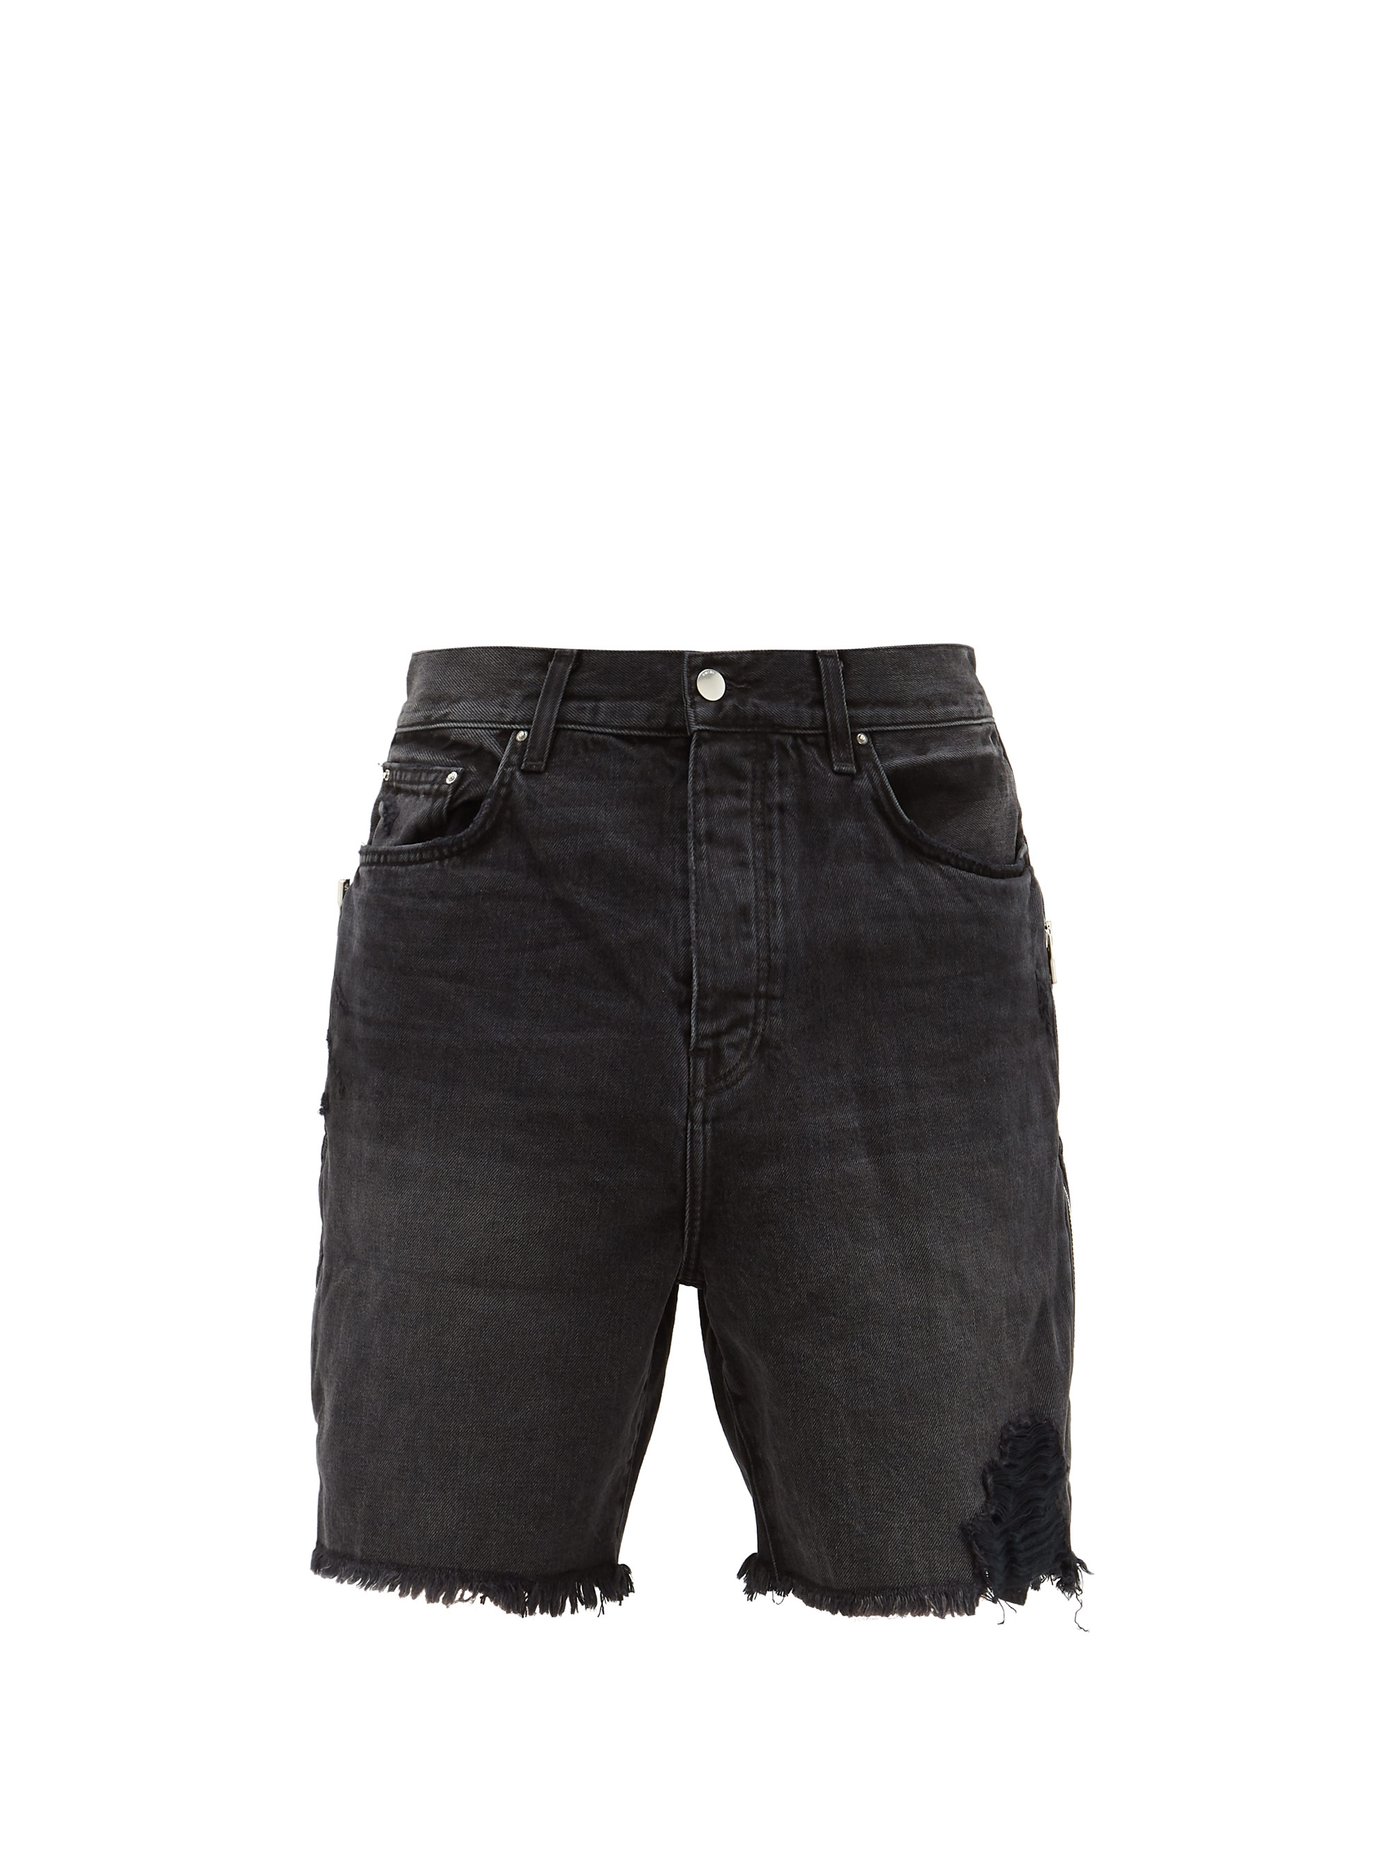 buy jeans shorts